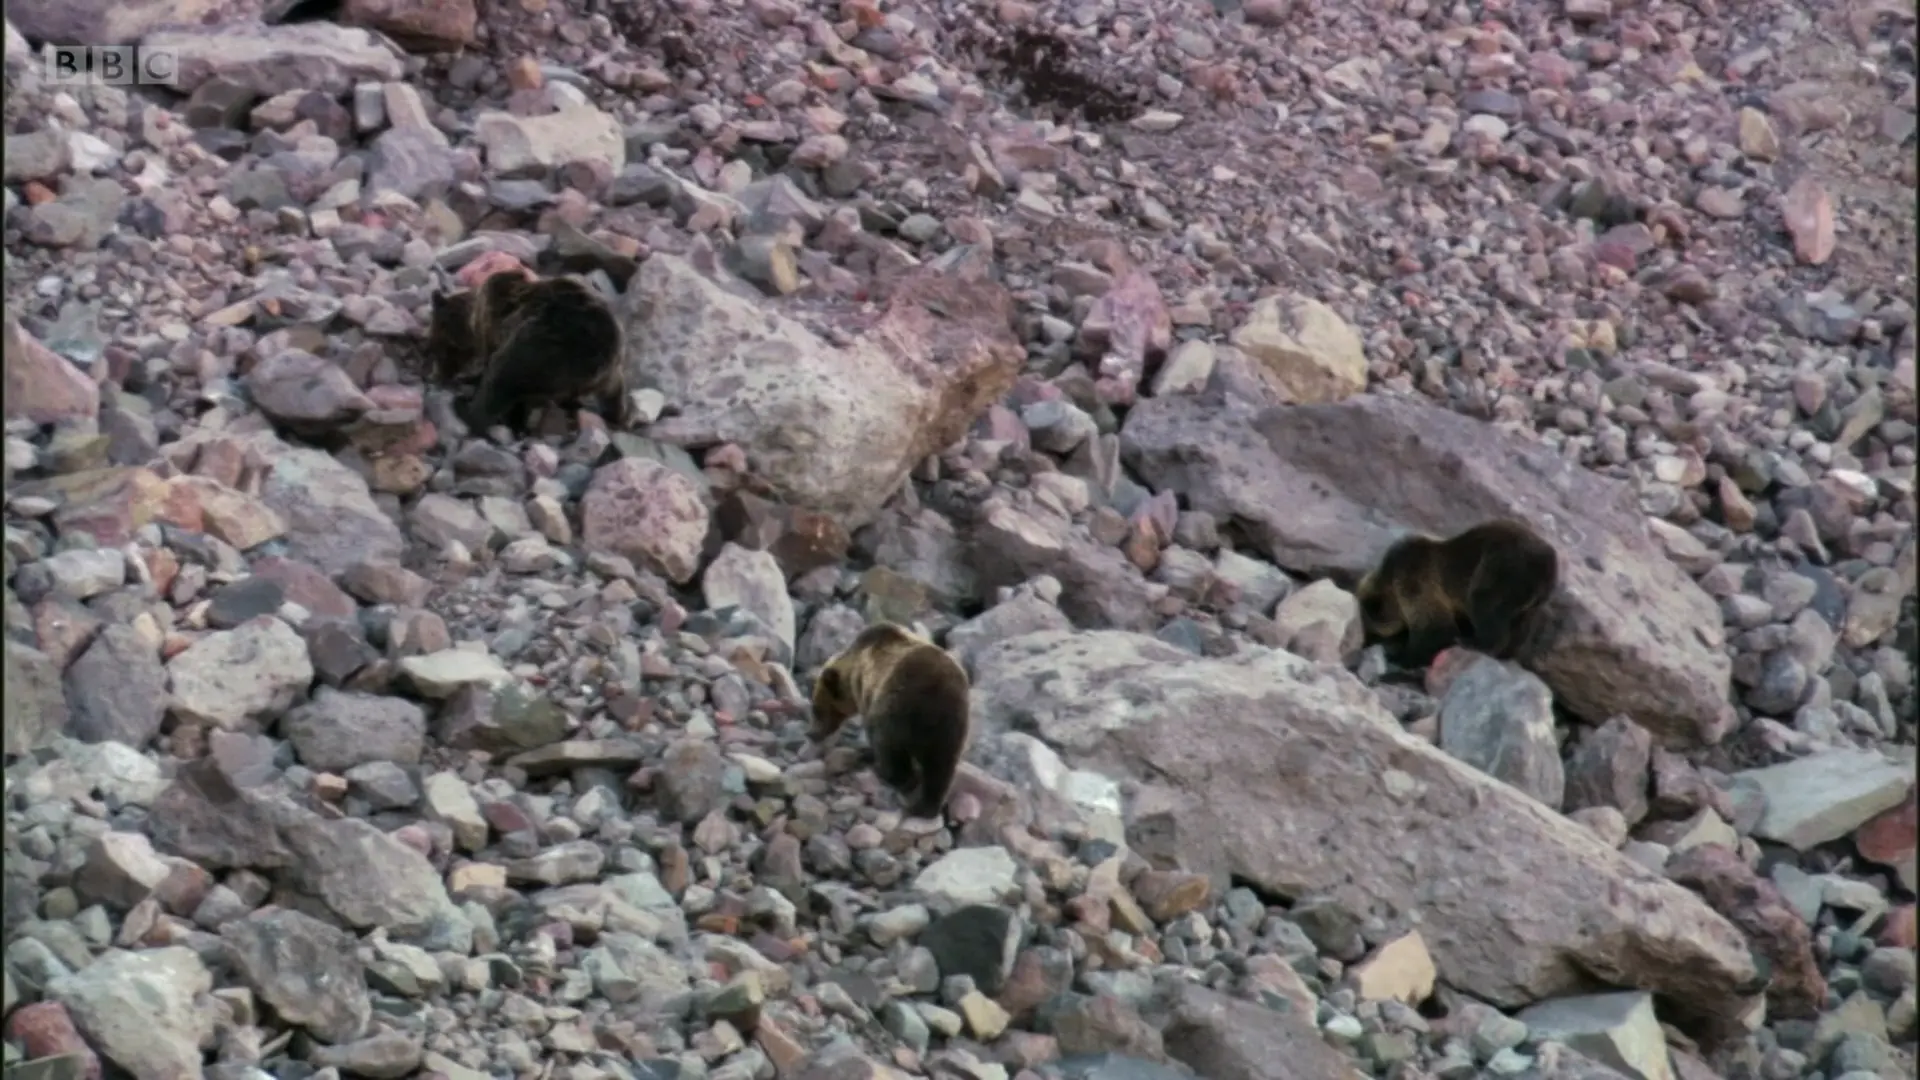 Grizzly bear (Ursus arctos horribilis) as shown in Planet Earth - Mountains